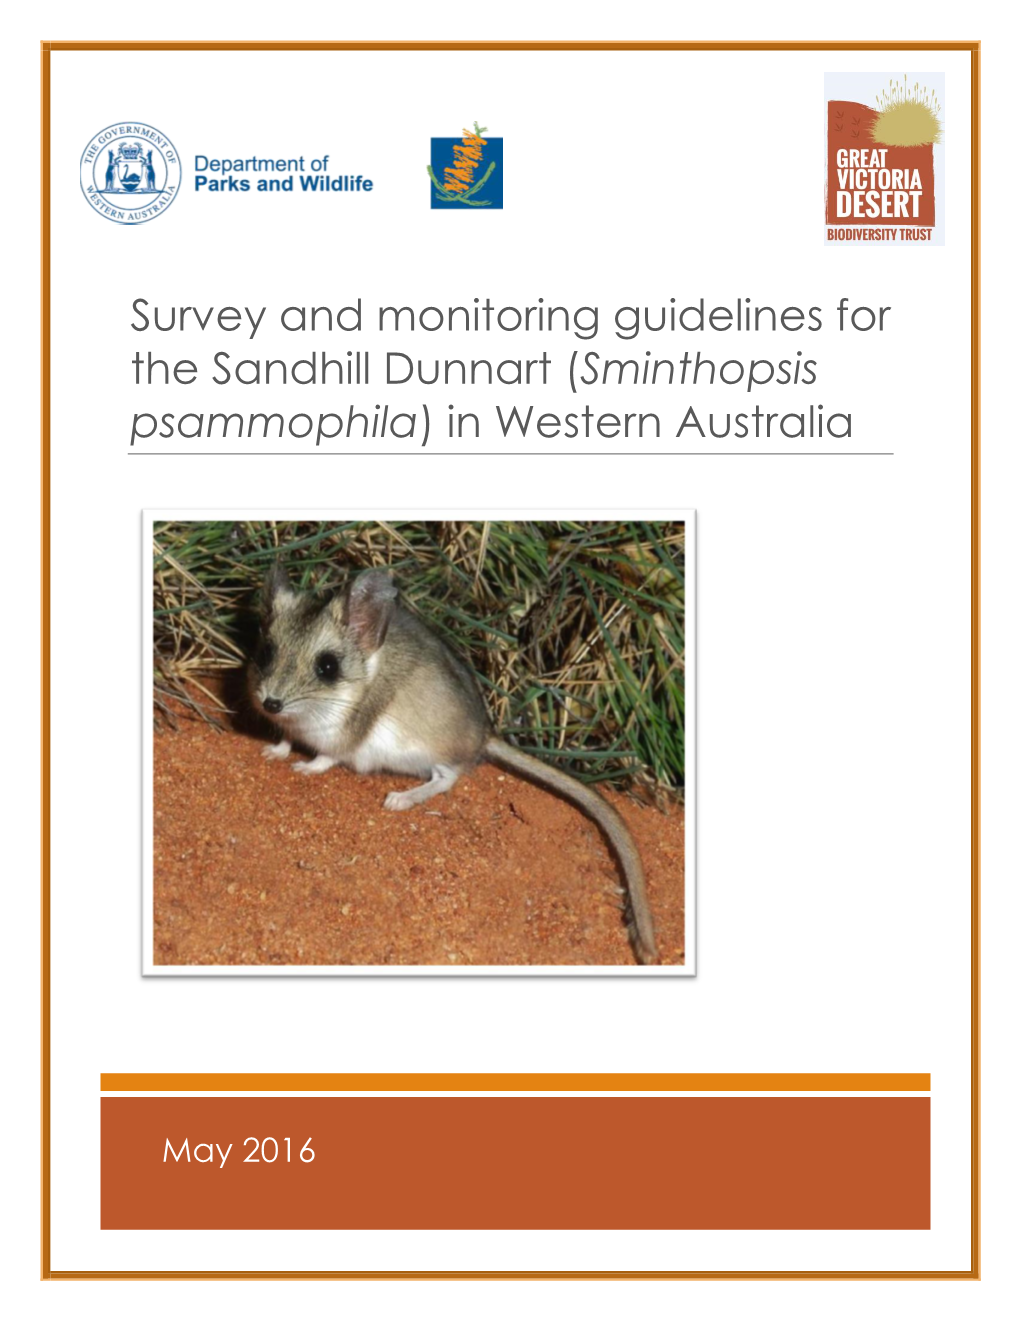 Survey Guidelines for the Sandhill Dunnart in Western Australia